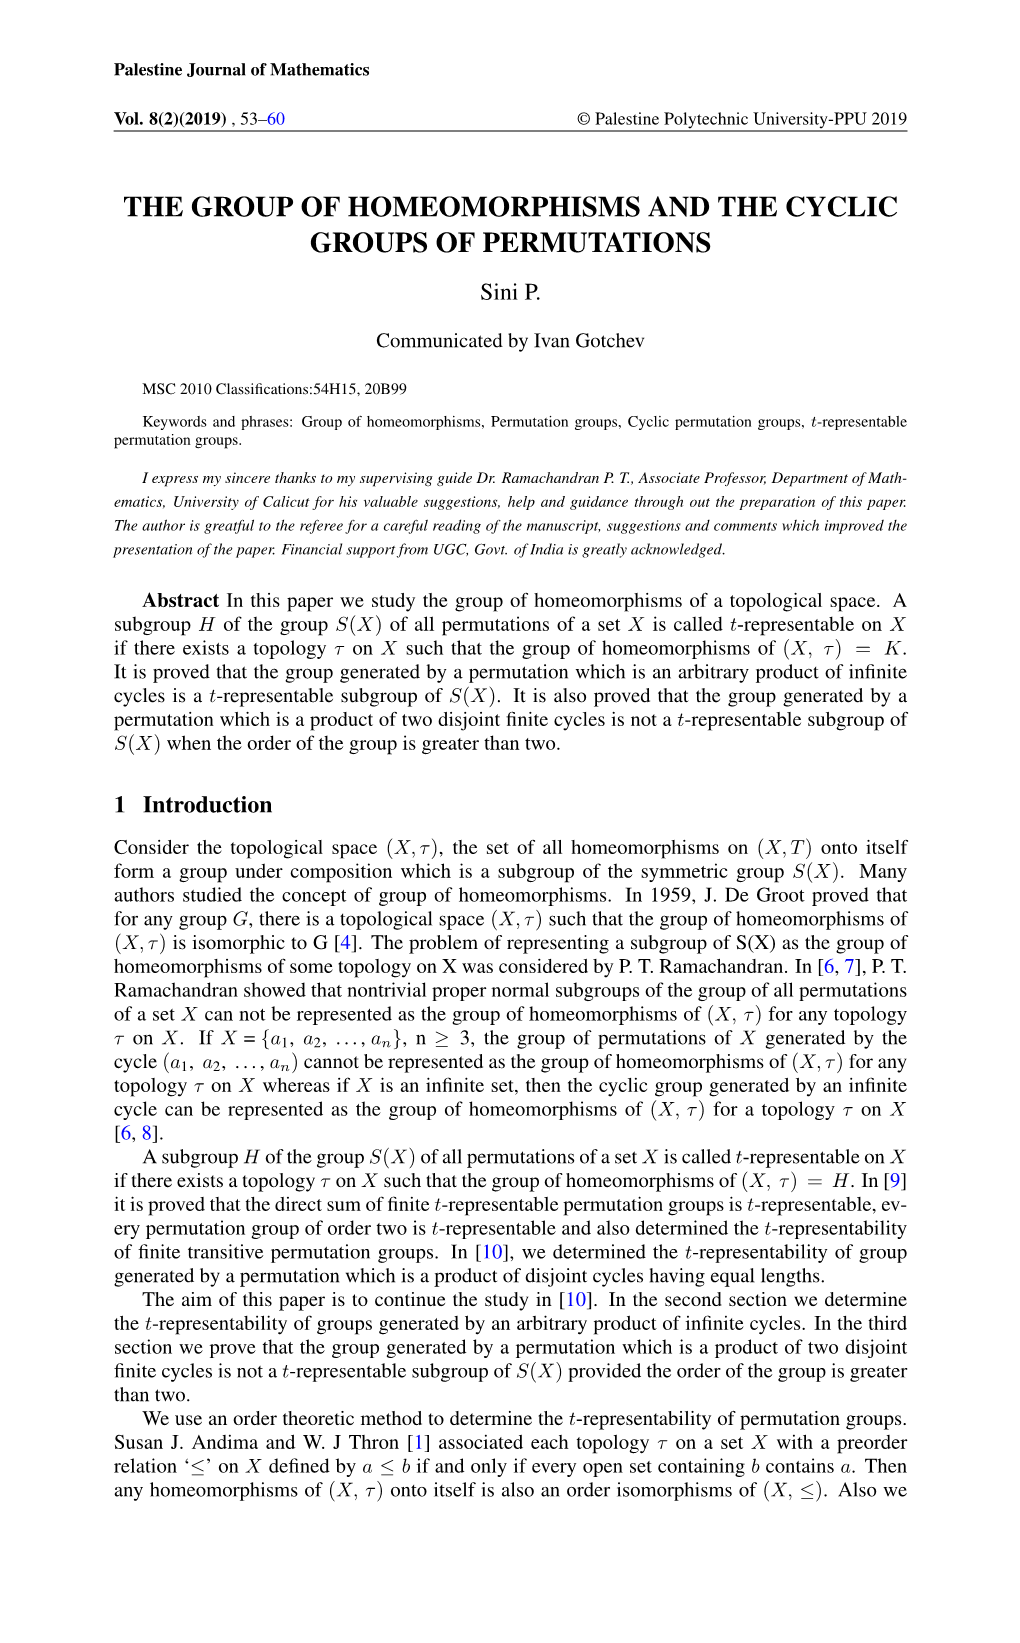 THE GROUP of HOMEOMORPHISMS and the CYCLIC GROUPS of PERMUTATIONS Sini P